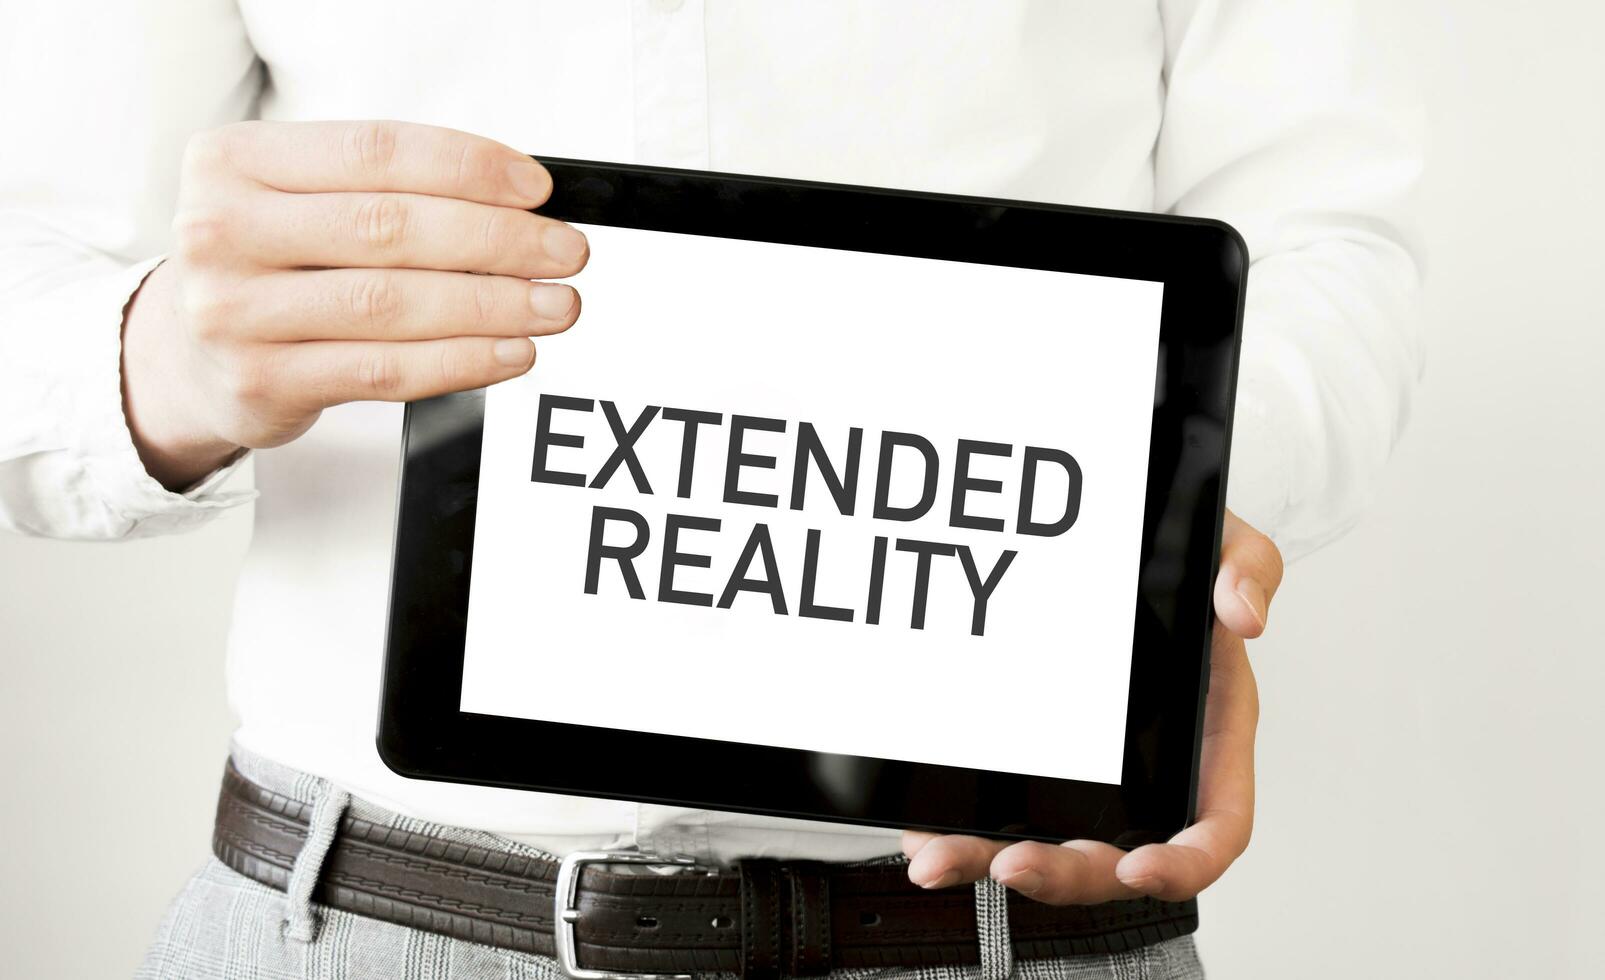 Text EXTENDED REALITY on tablet display in businessman hands on the white background. Business concept photo